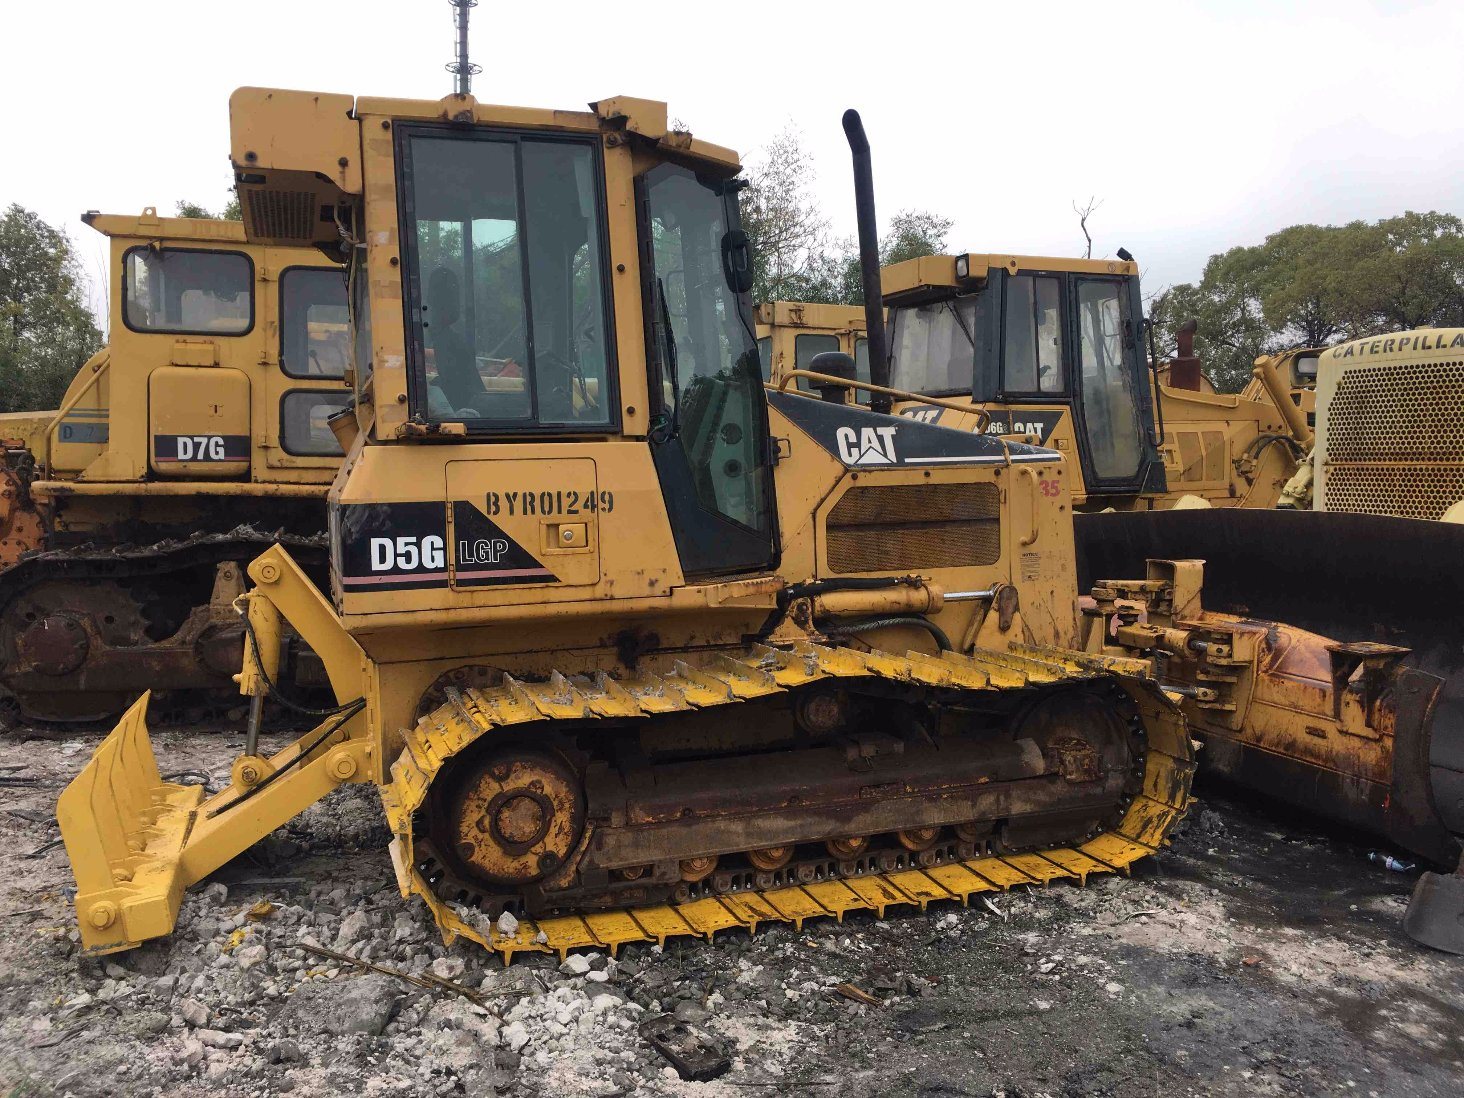 Used /Secondhand Original USA Cat D5g Bulldozer in Low Price for Hot Sale